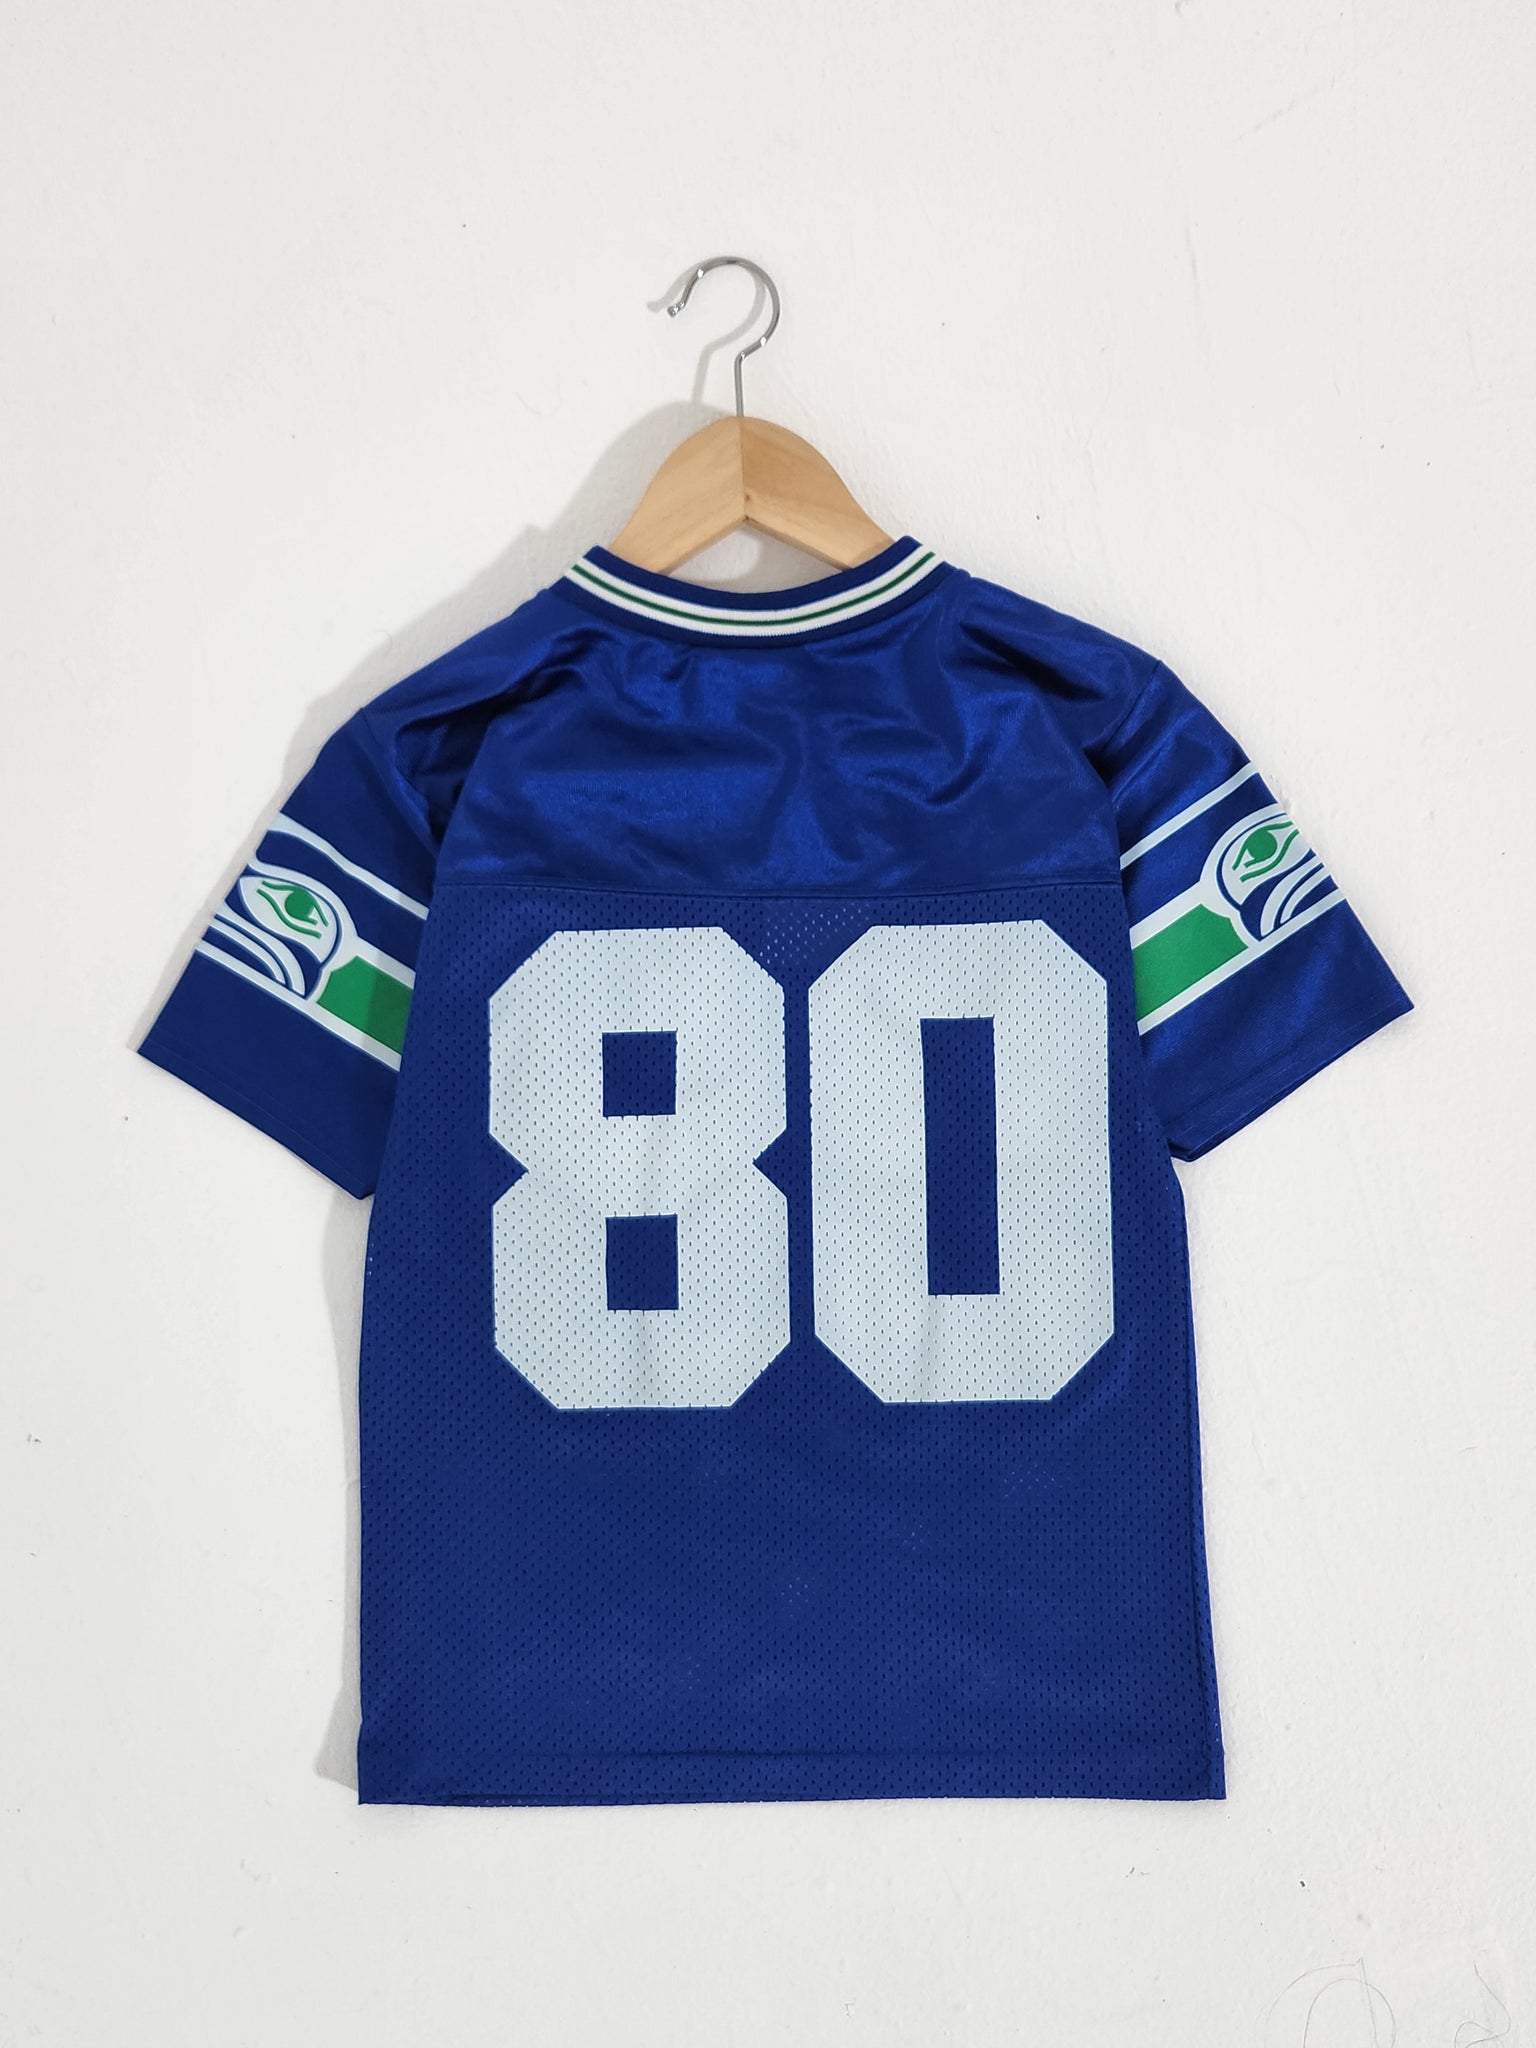 seahawks youth xl jersey